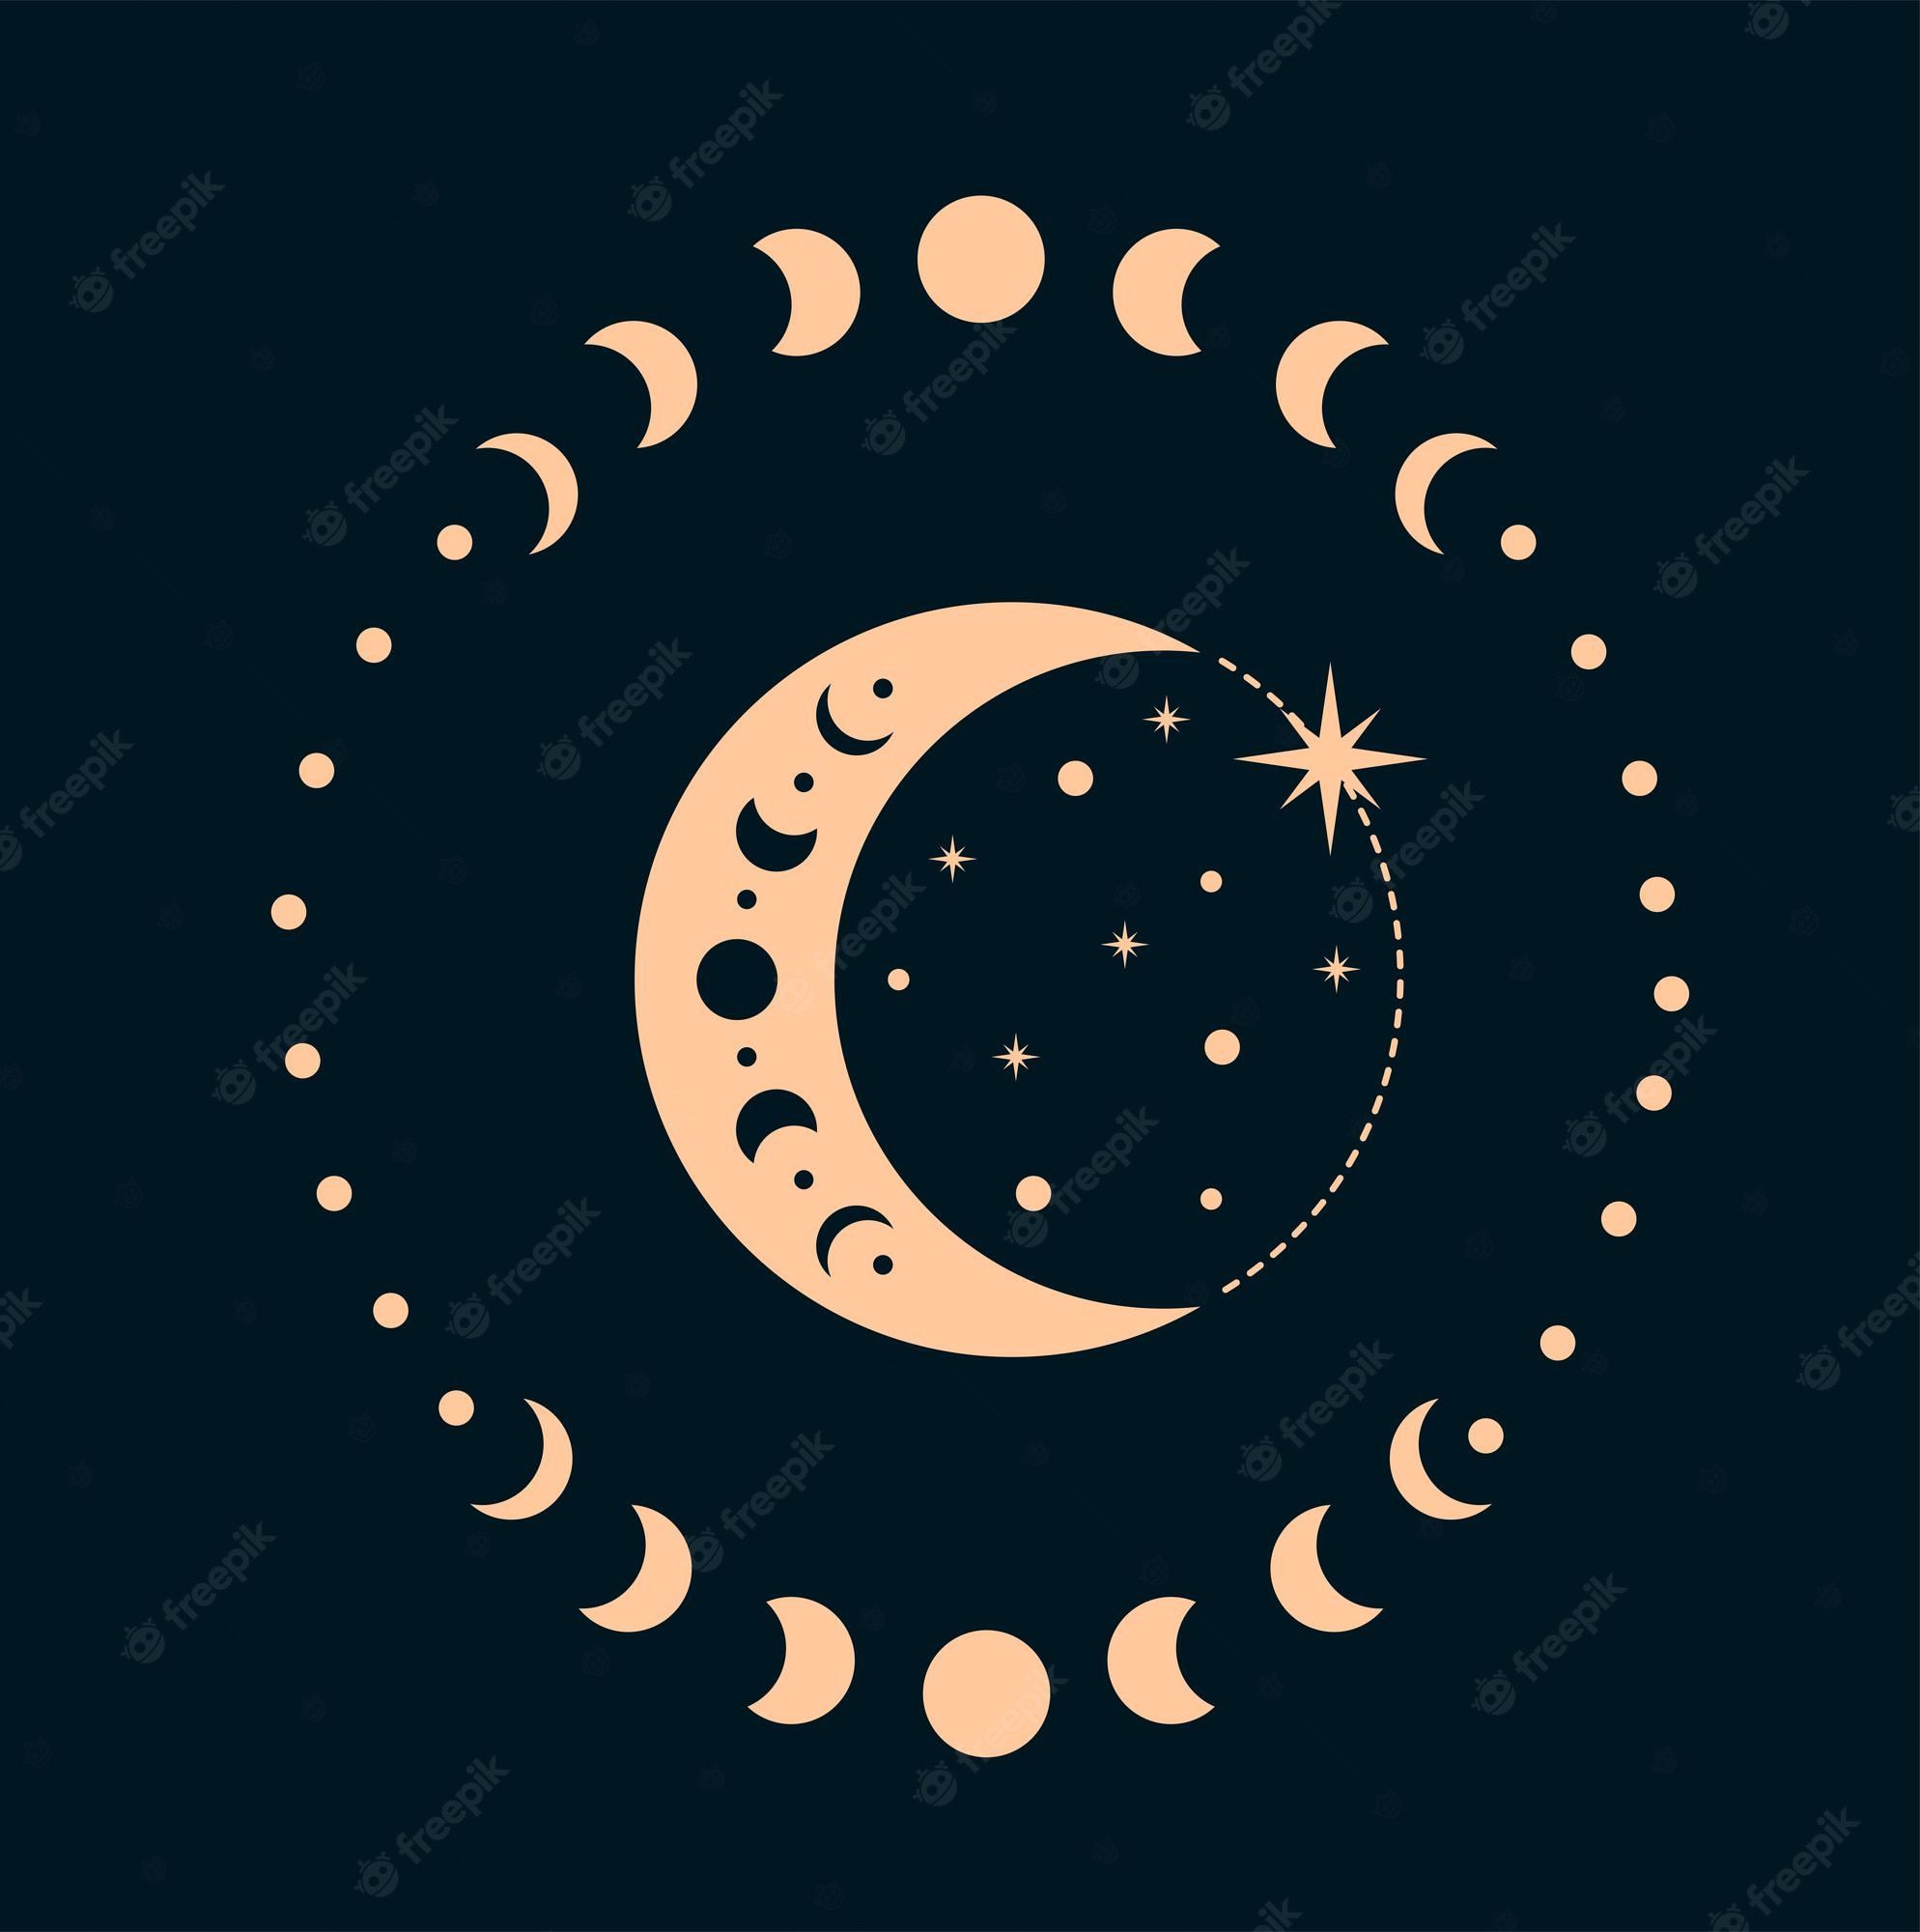 Moon Phases Image